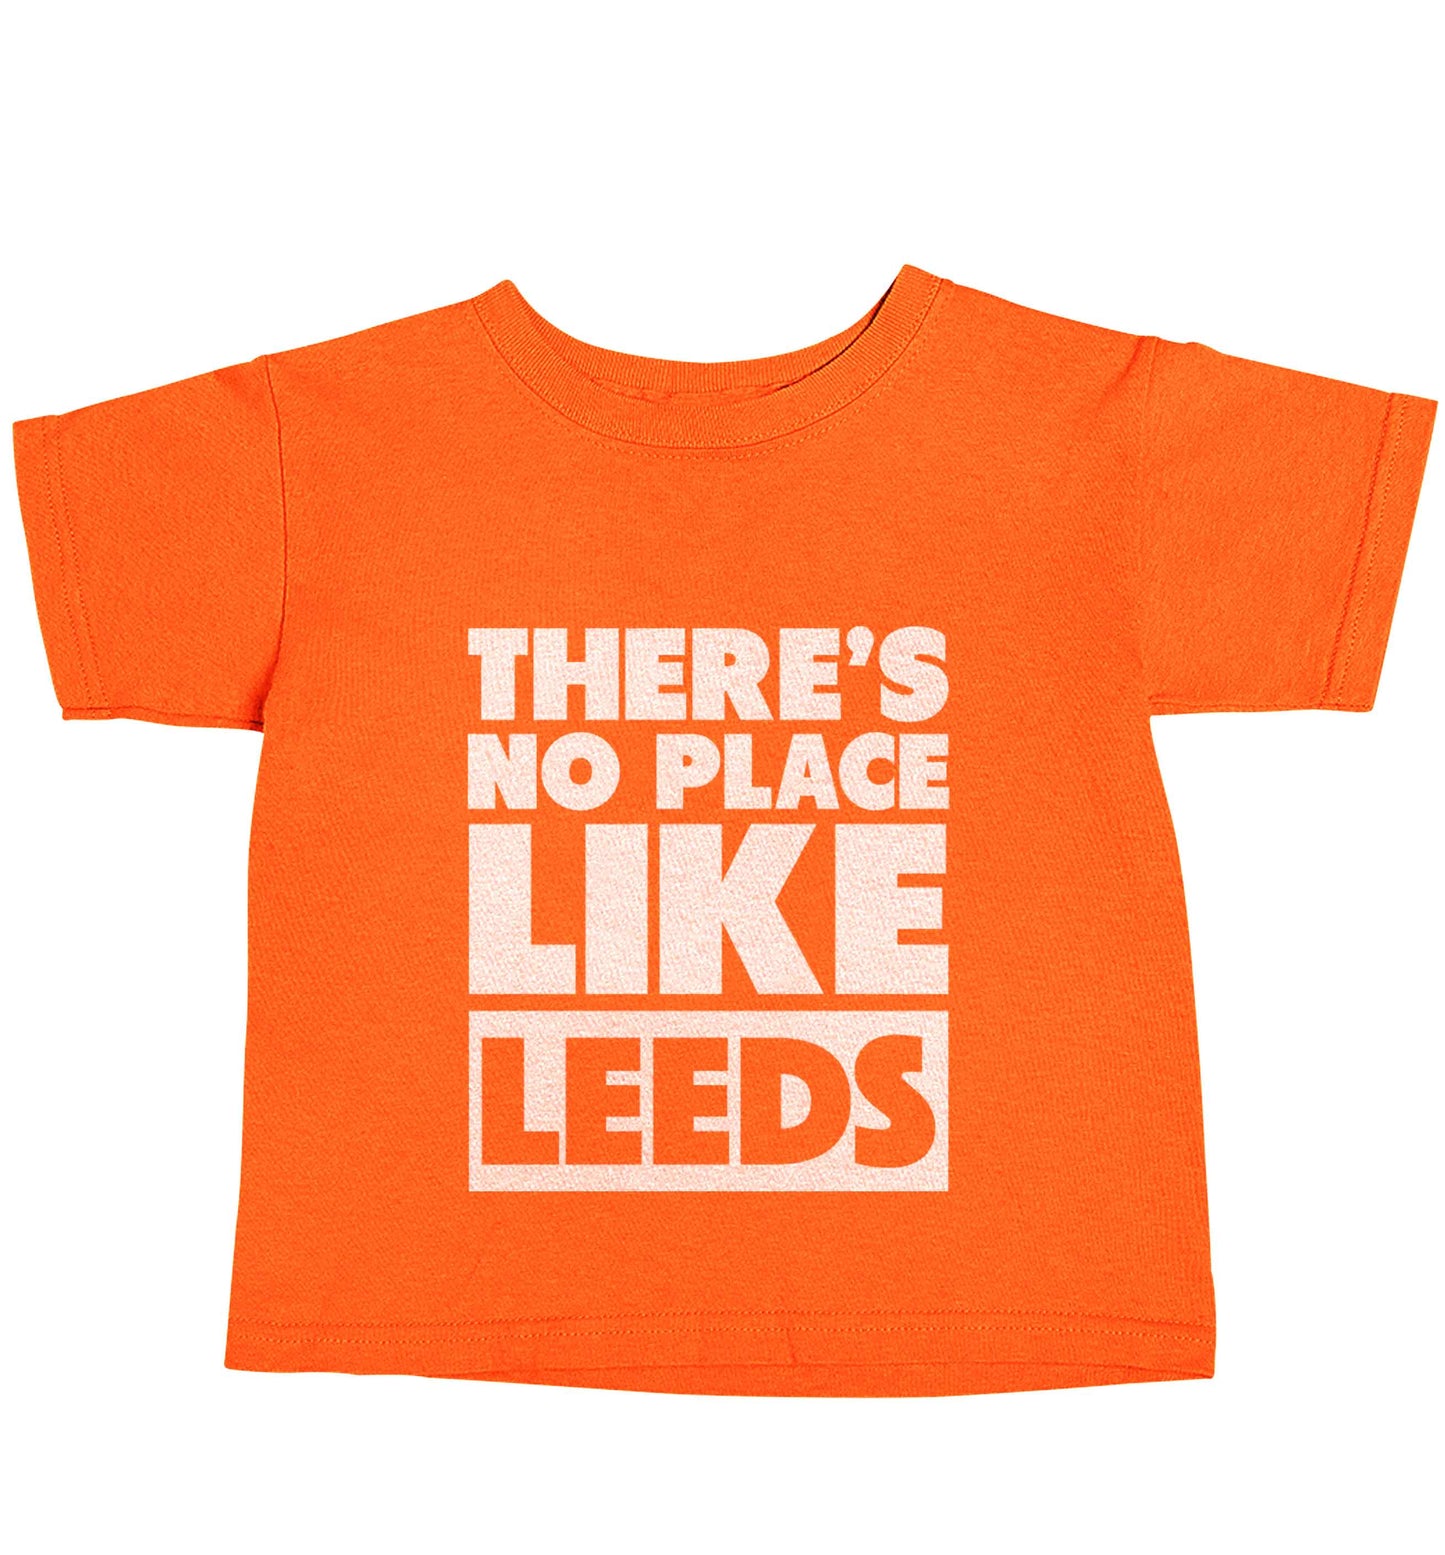 There's no place like Leeds orange baby toddler Tshirt 2 Years